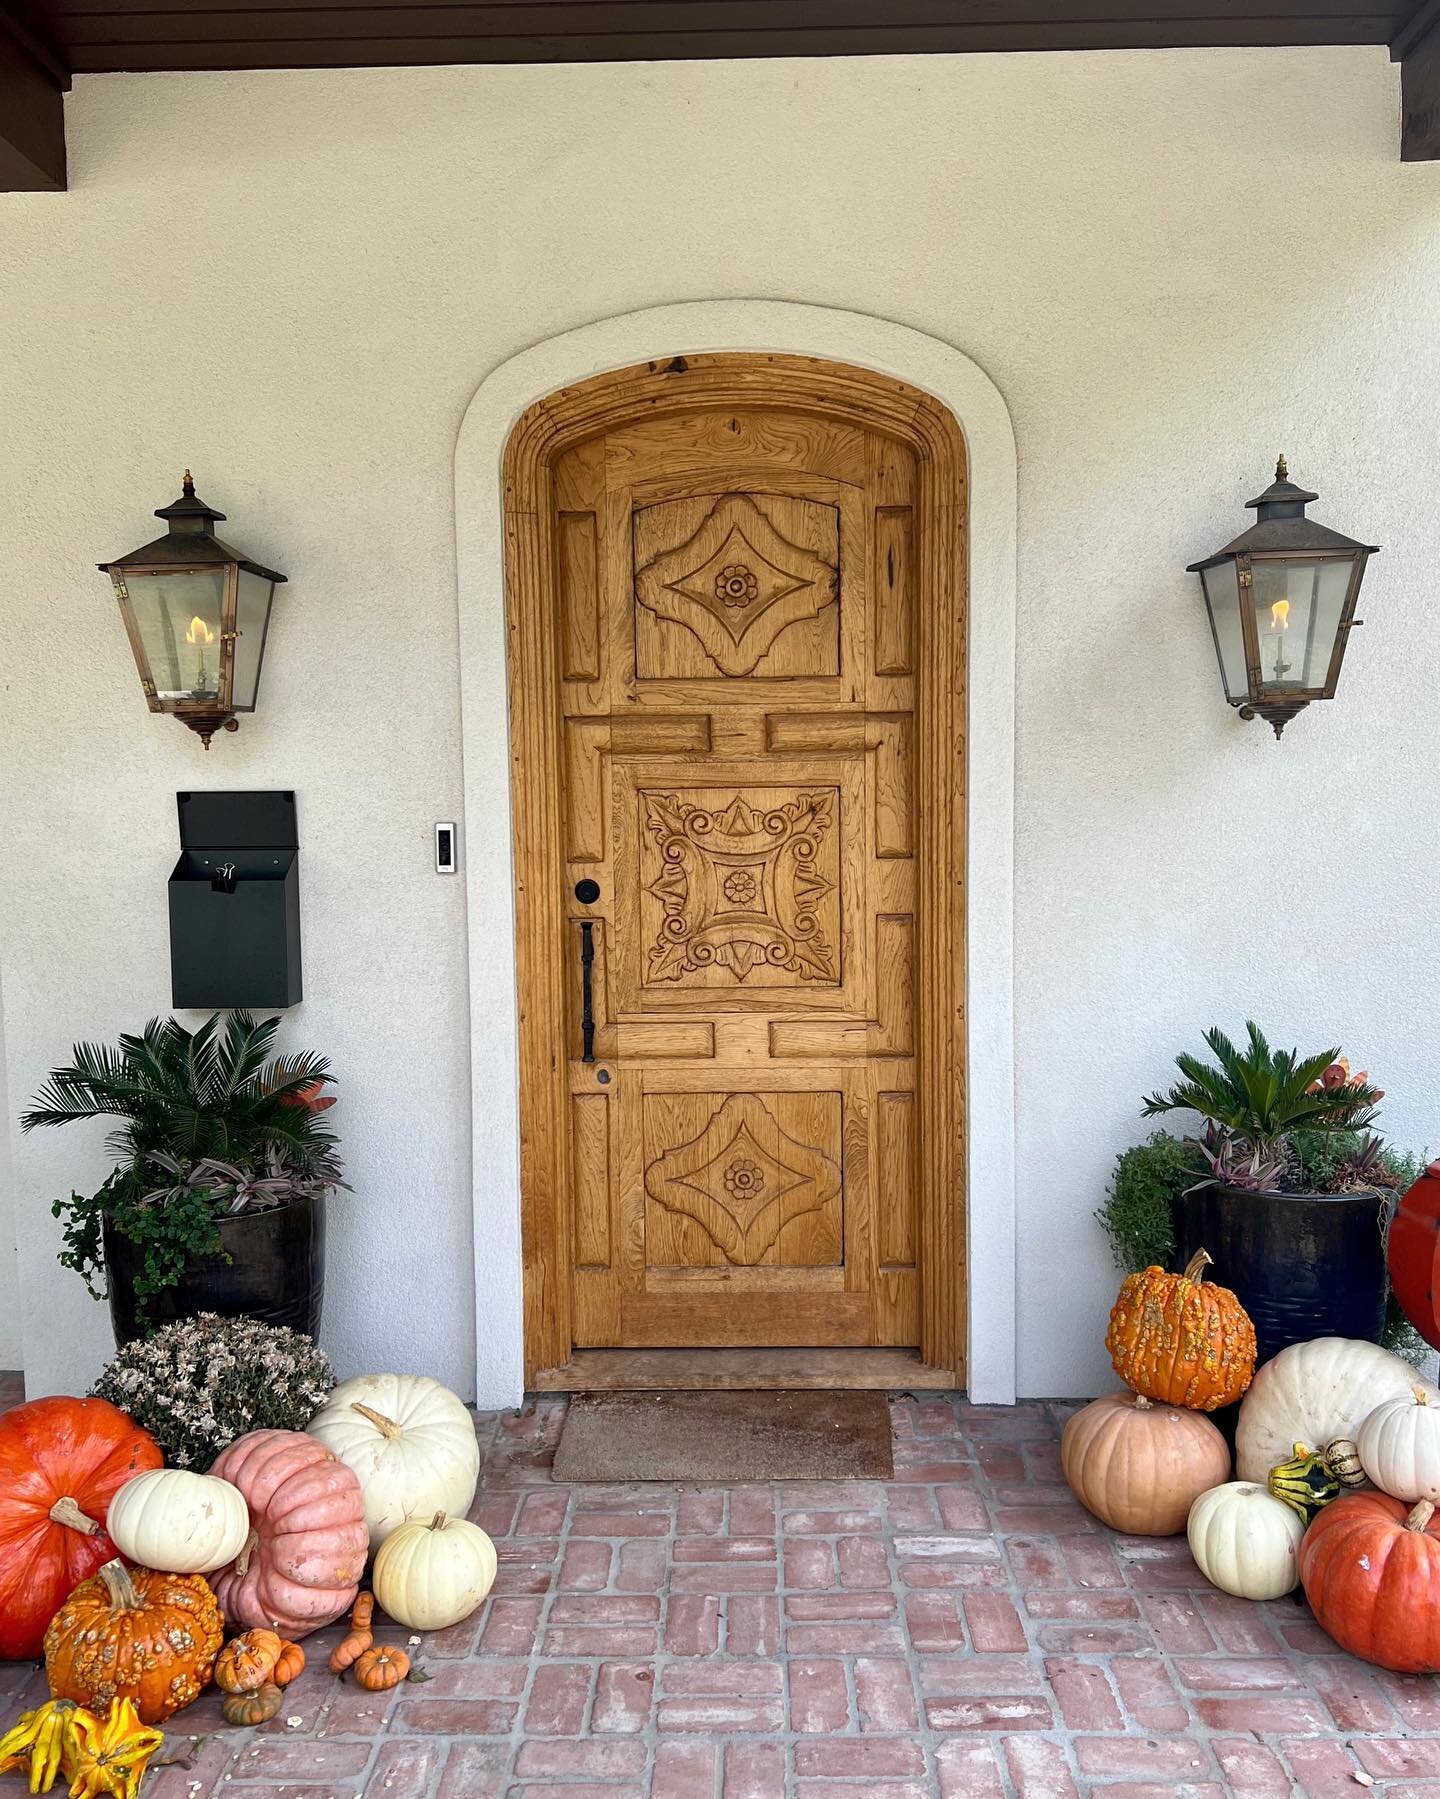 We love receiving pictures from our clients, this custom door of ours makes a warm welcome to their beautiful home. #doors #door #customdoors #beautifulhomes #welcomehome #handcarved #luxuryhomes